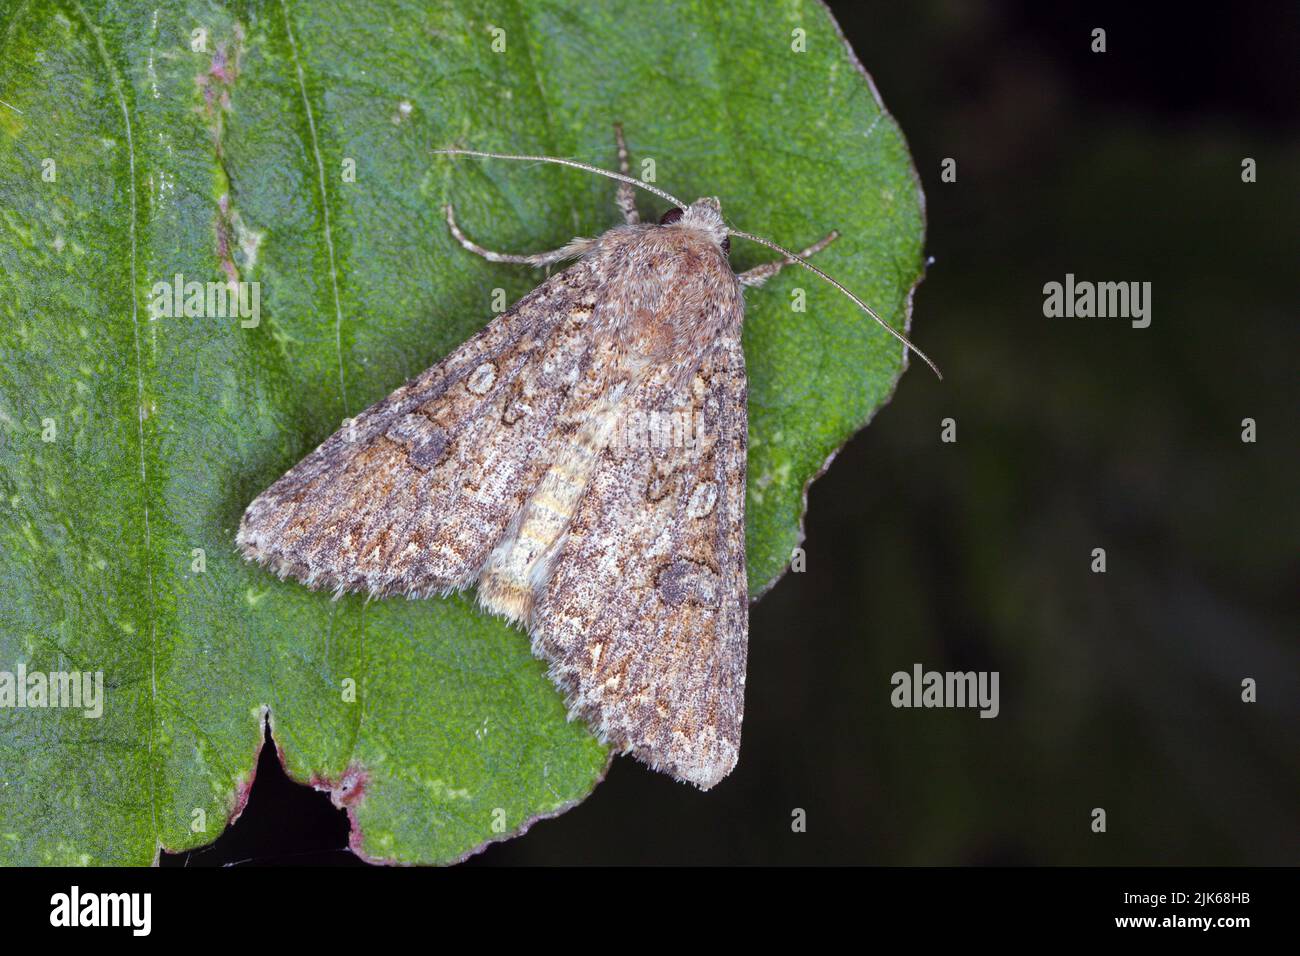 Cabbage moth (Mamestra brassicae). Insect in the family Noctuidae. Stock Photo